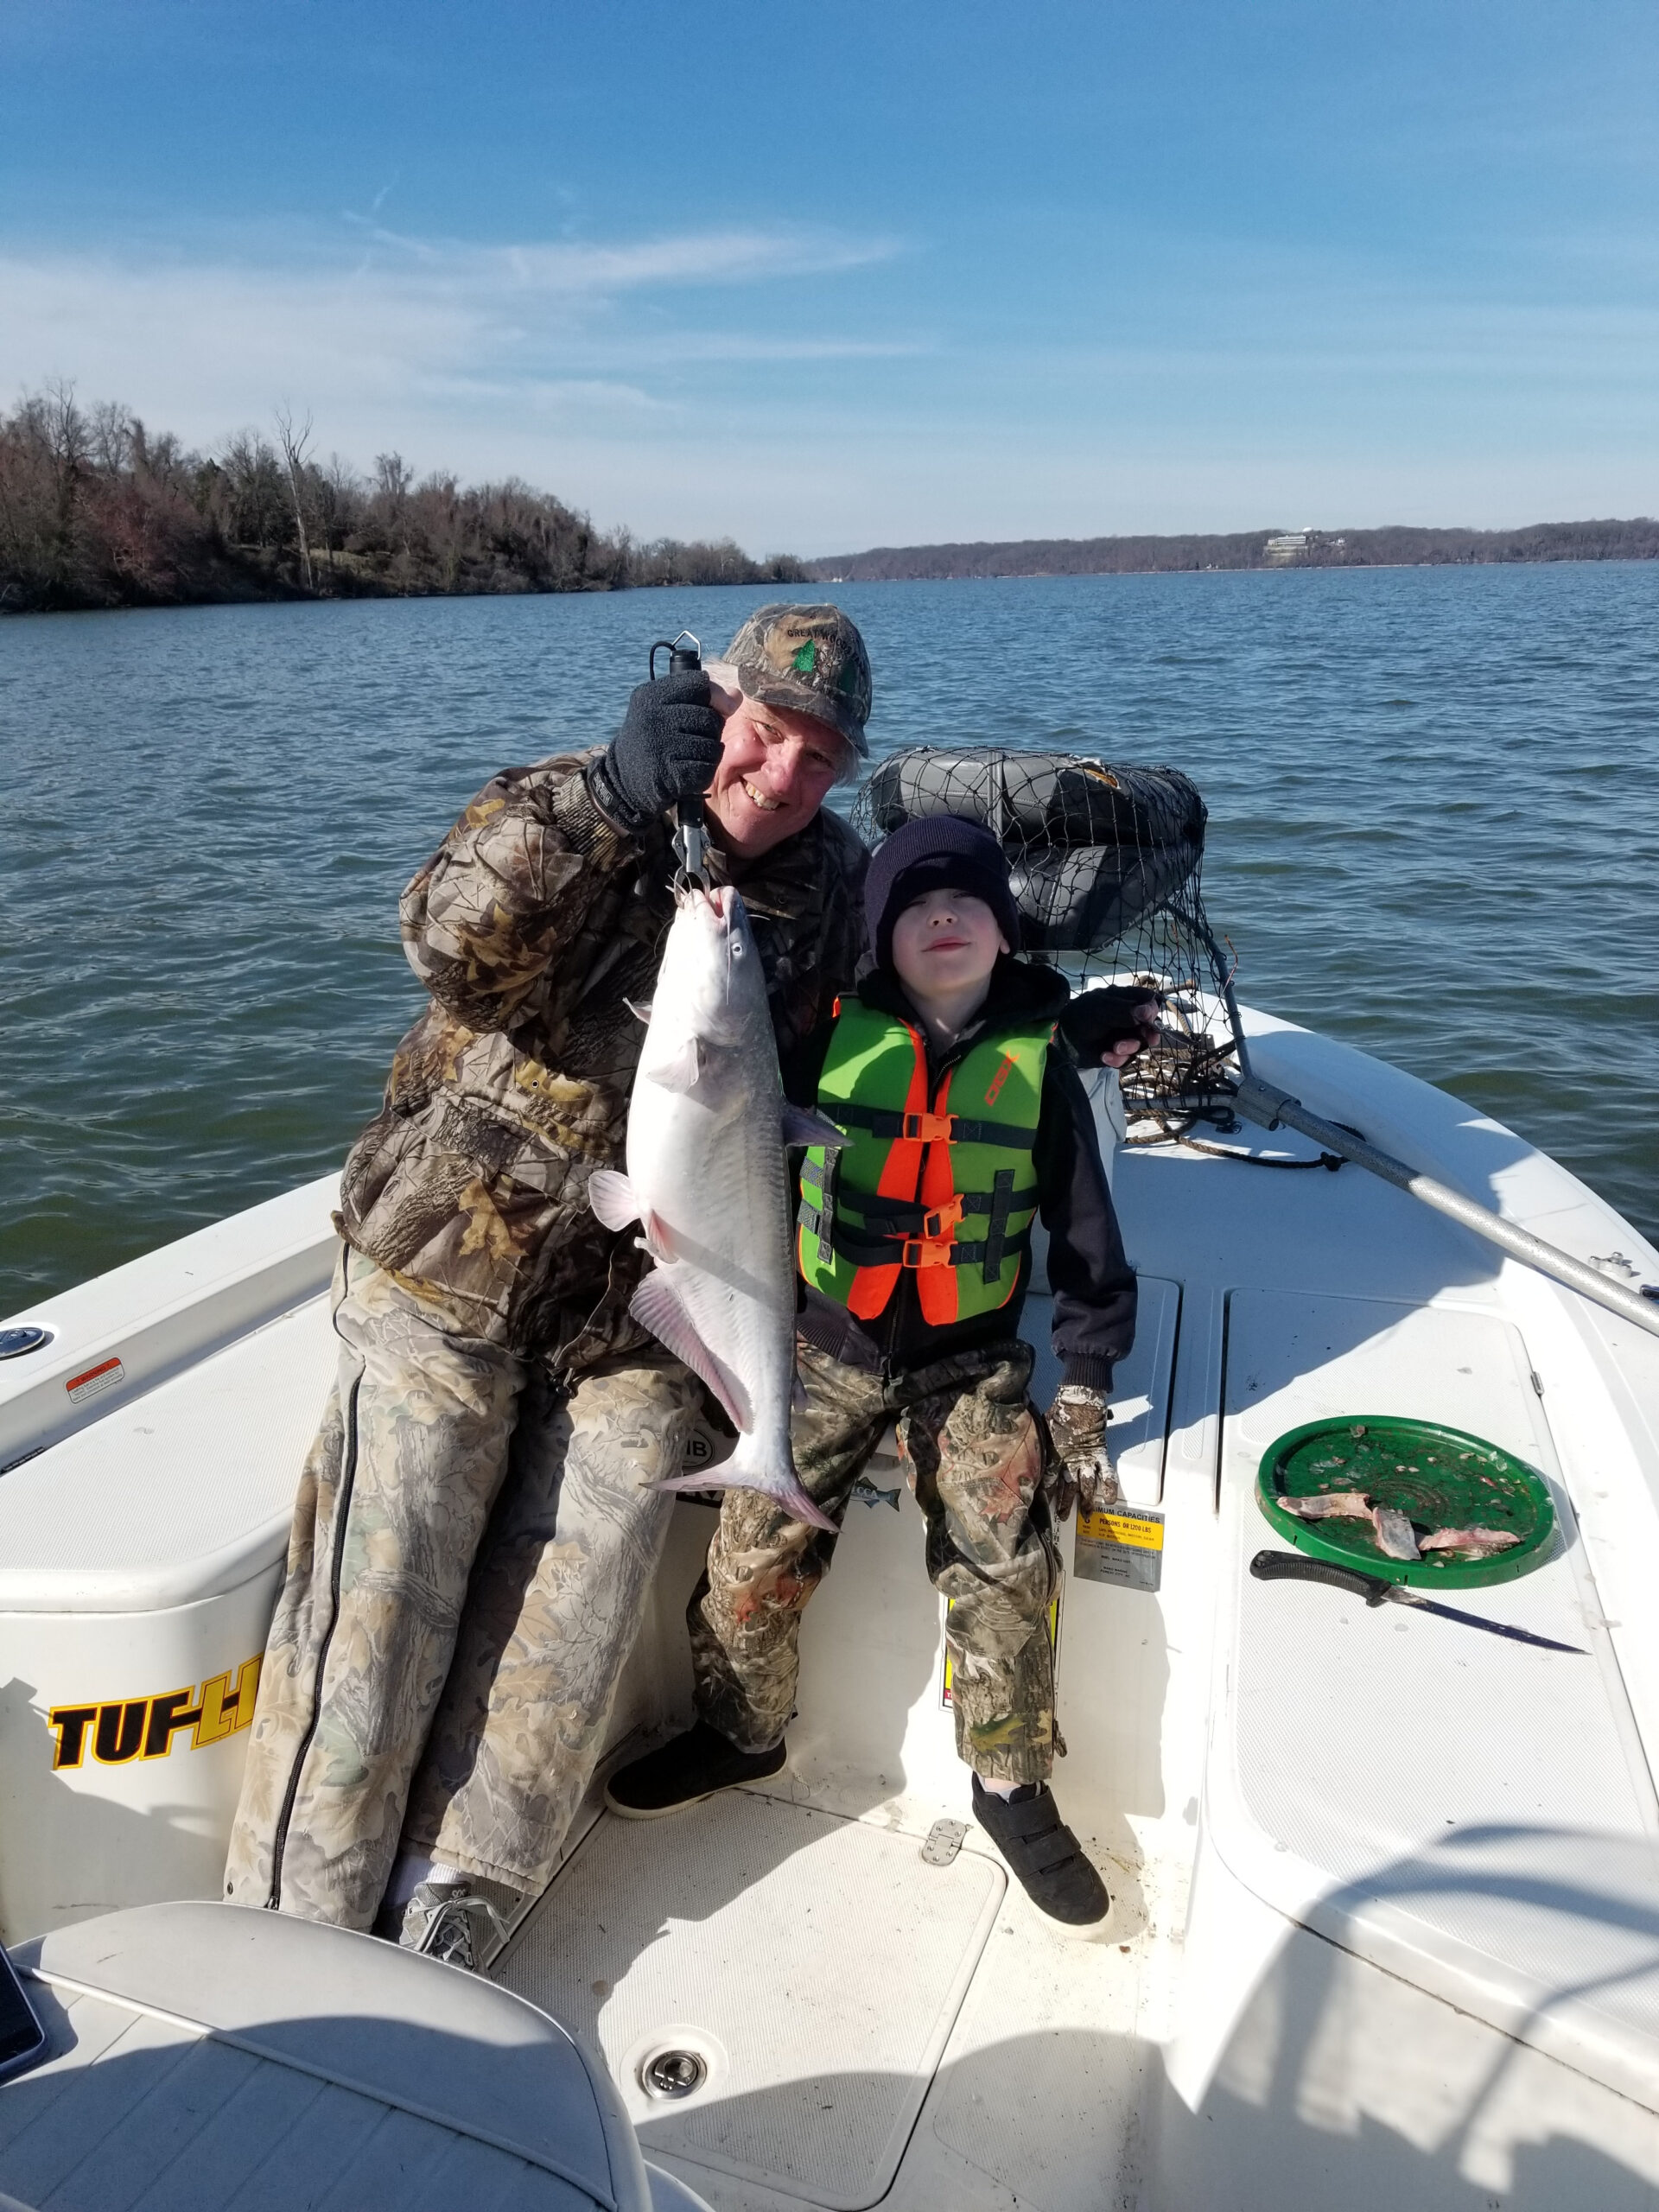 https://indianheadcharters.com/wp-content/uploads/2020/03/3-12-20-scaled.jpg